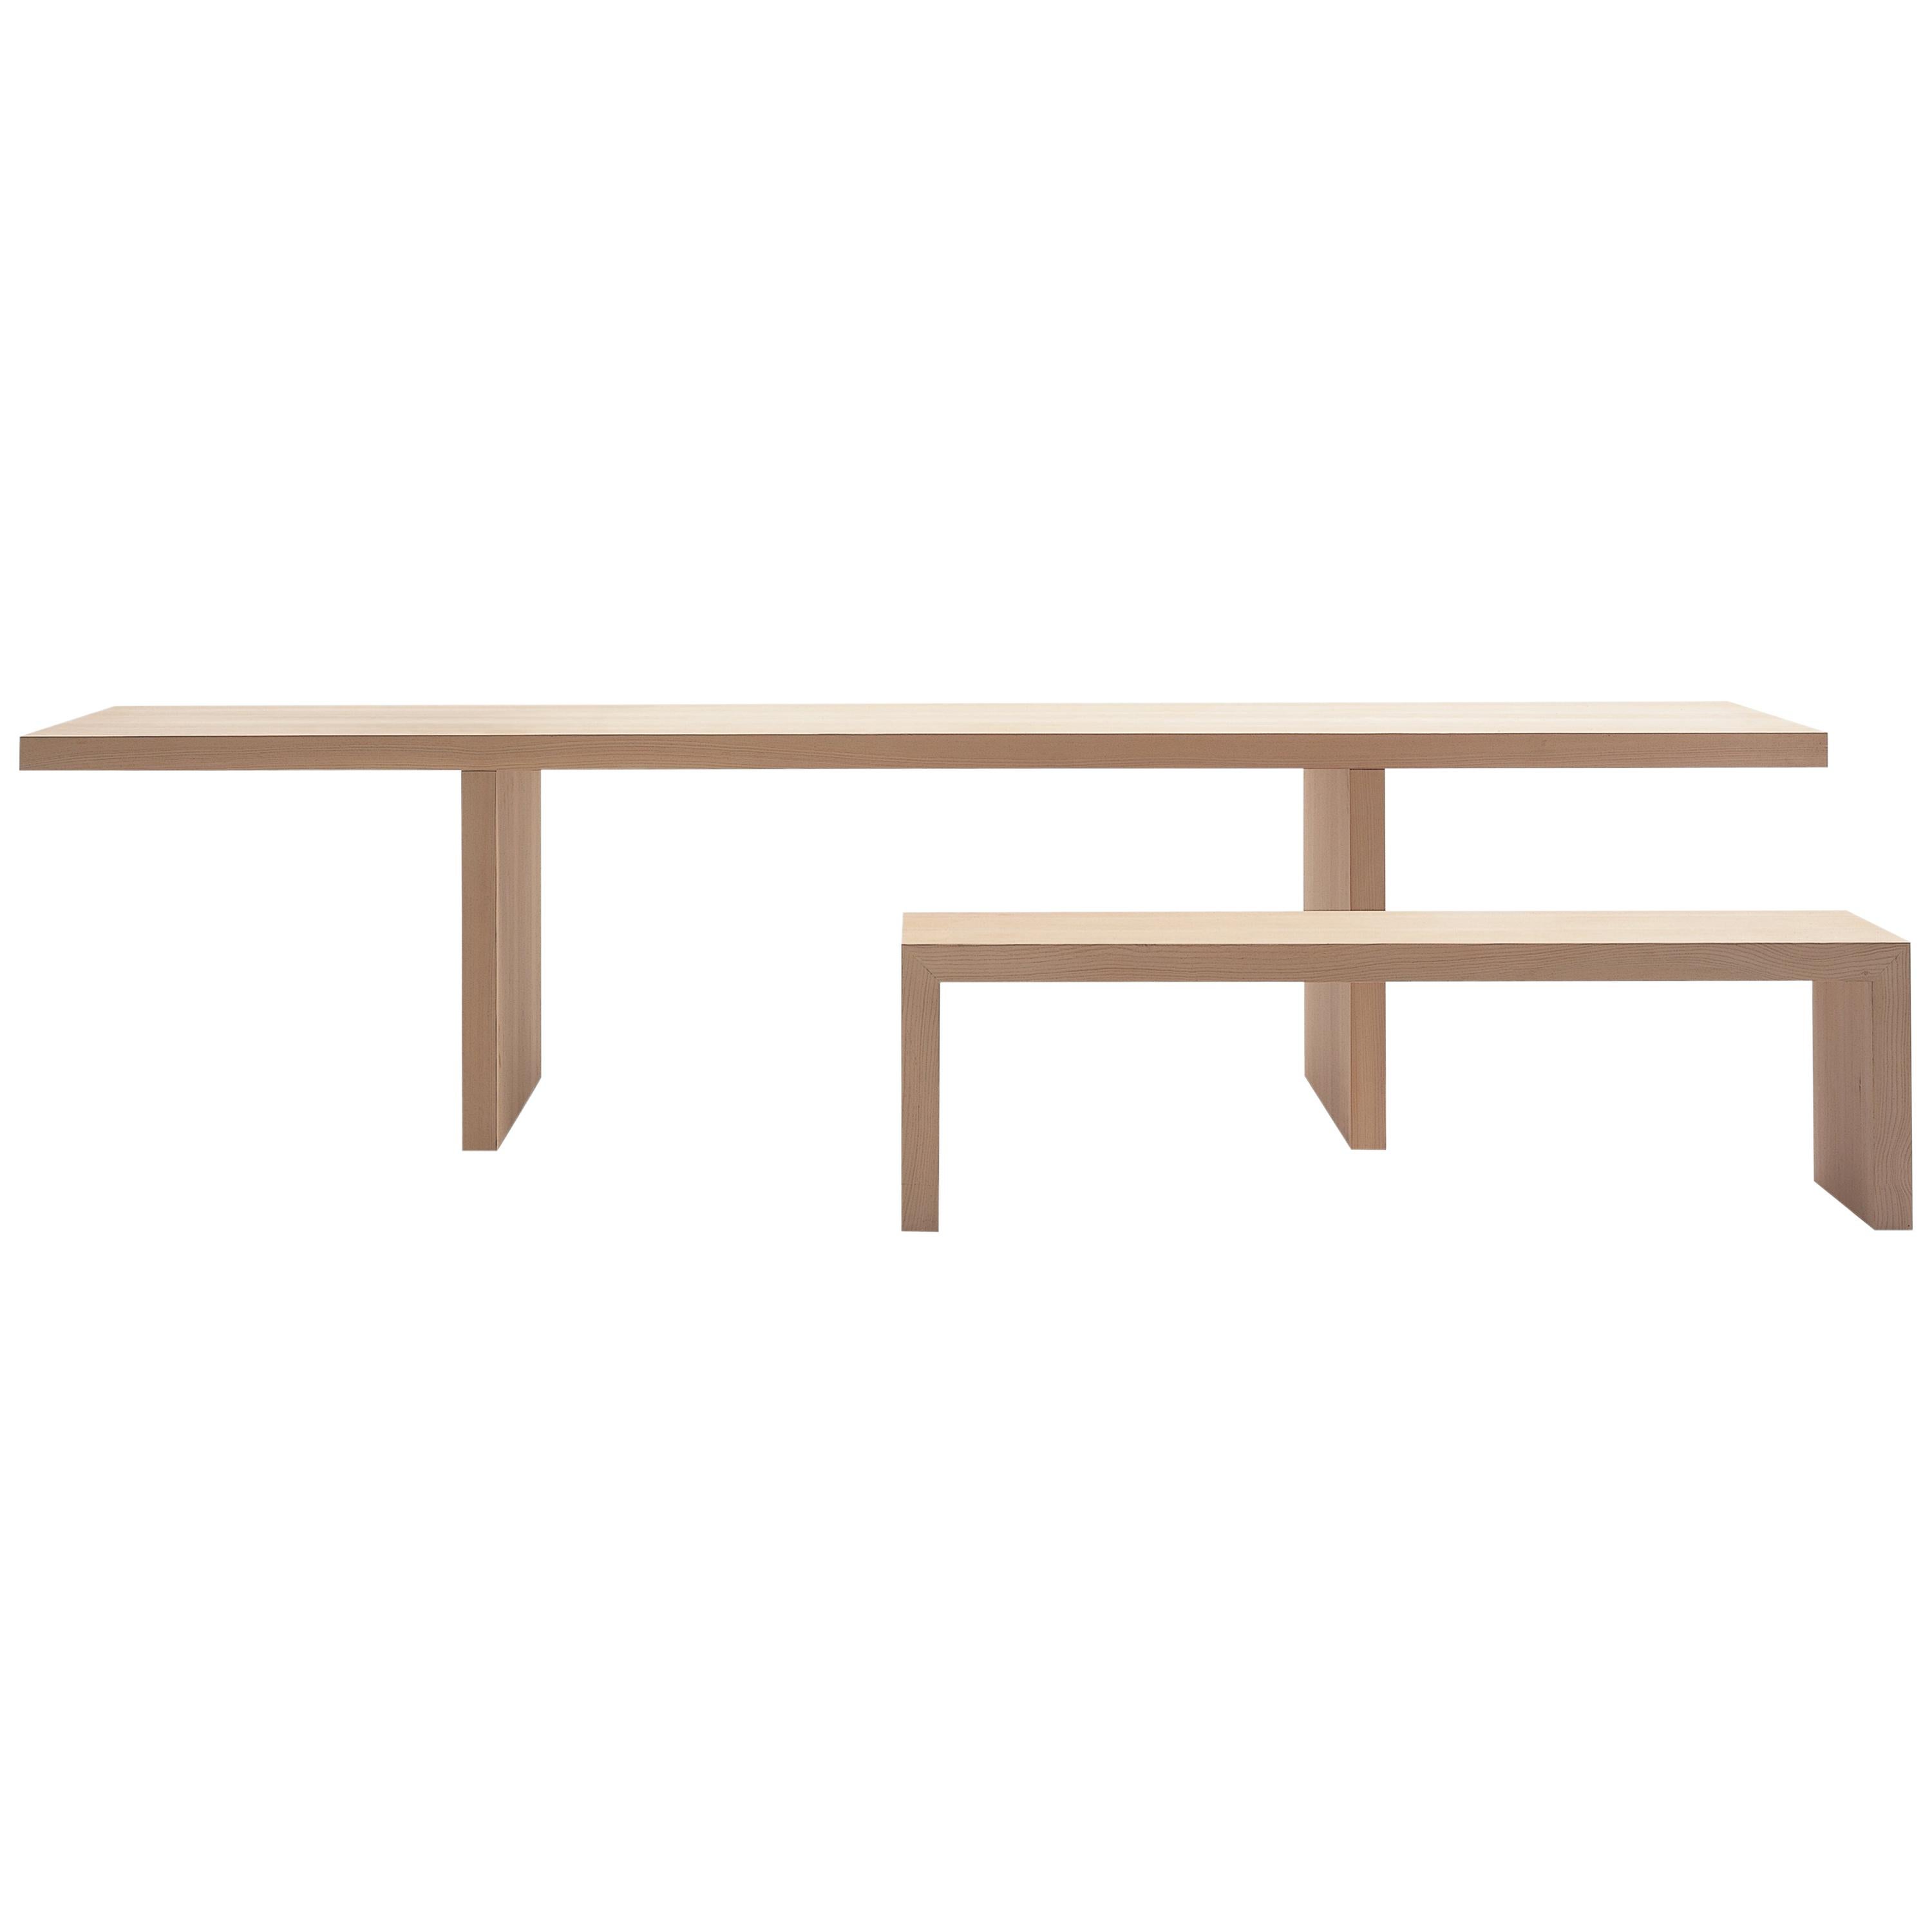 For Sale: Beige (133_NATURAL OAK) Claudio Silvestrin Millenium Hope Table in Honeycomb Fir for Cappellini